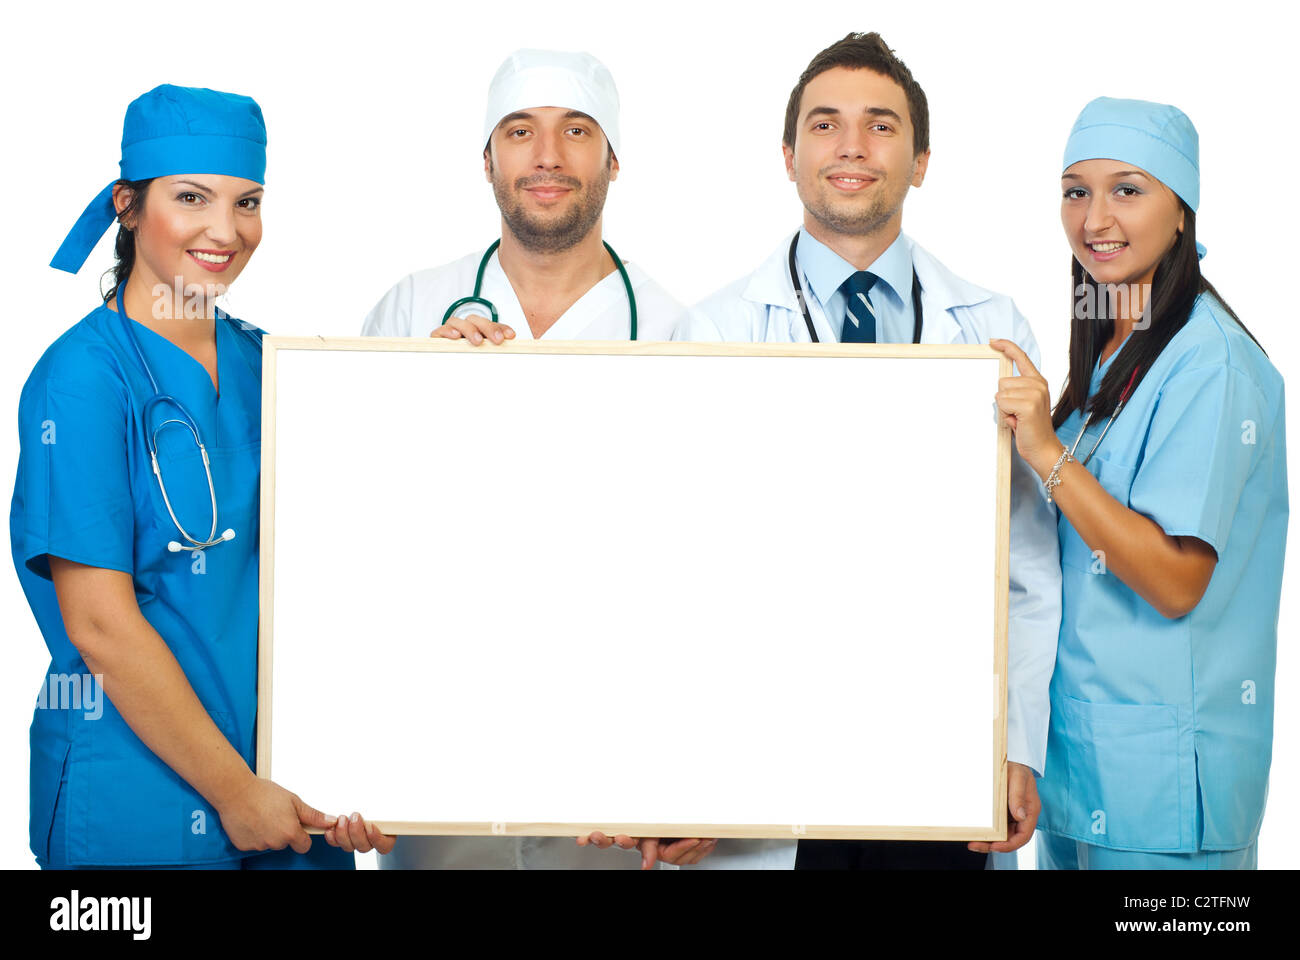 Four smiling different doctors holding a blank banner Stock Photo